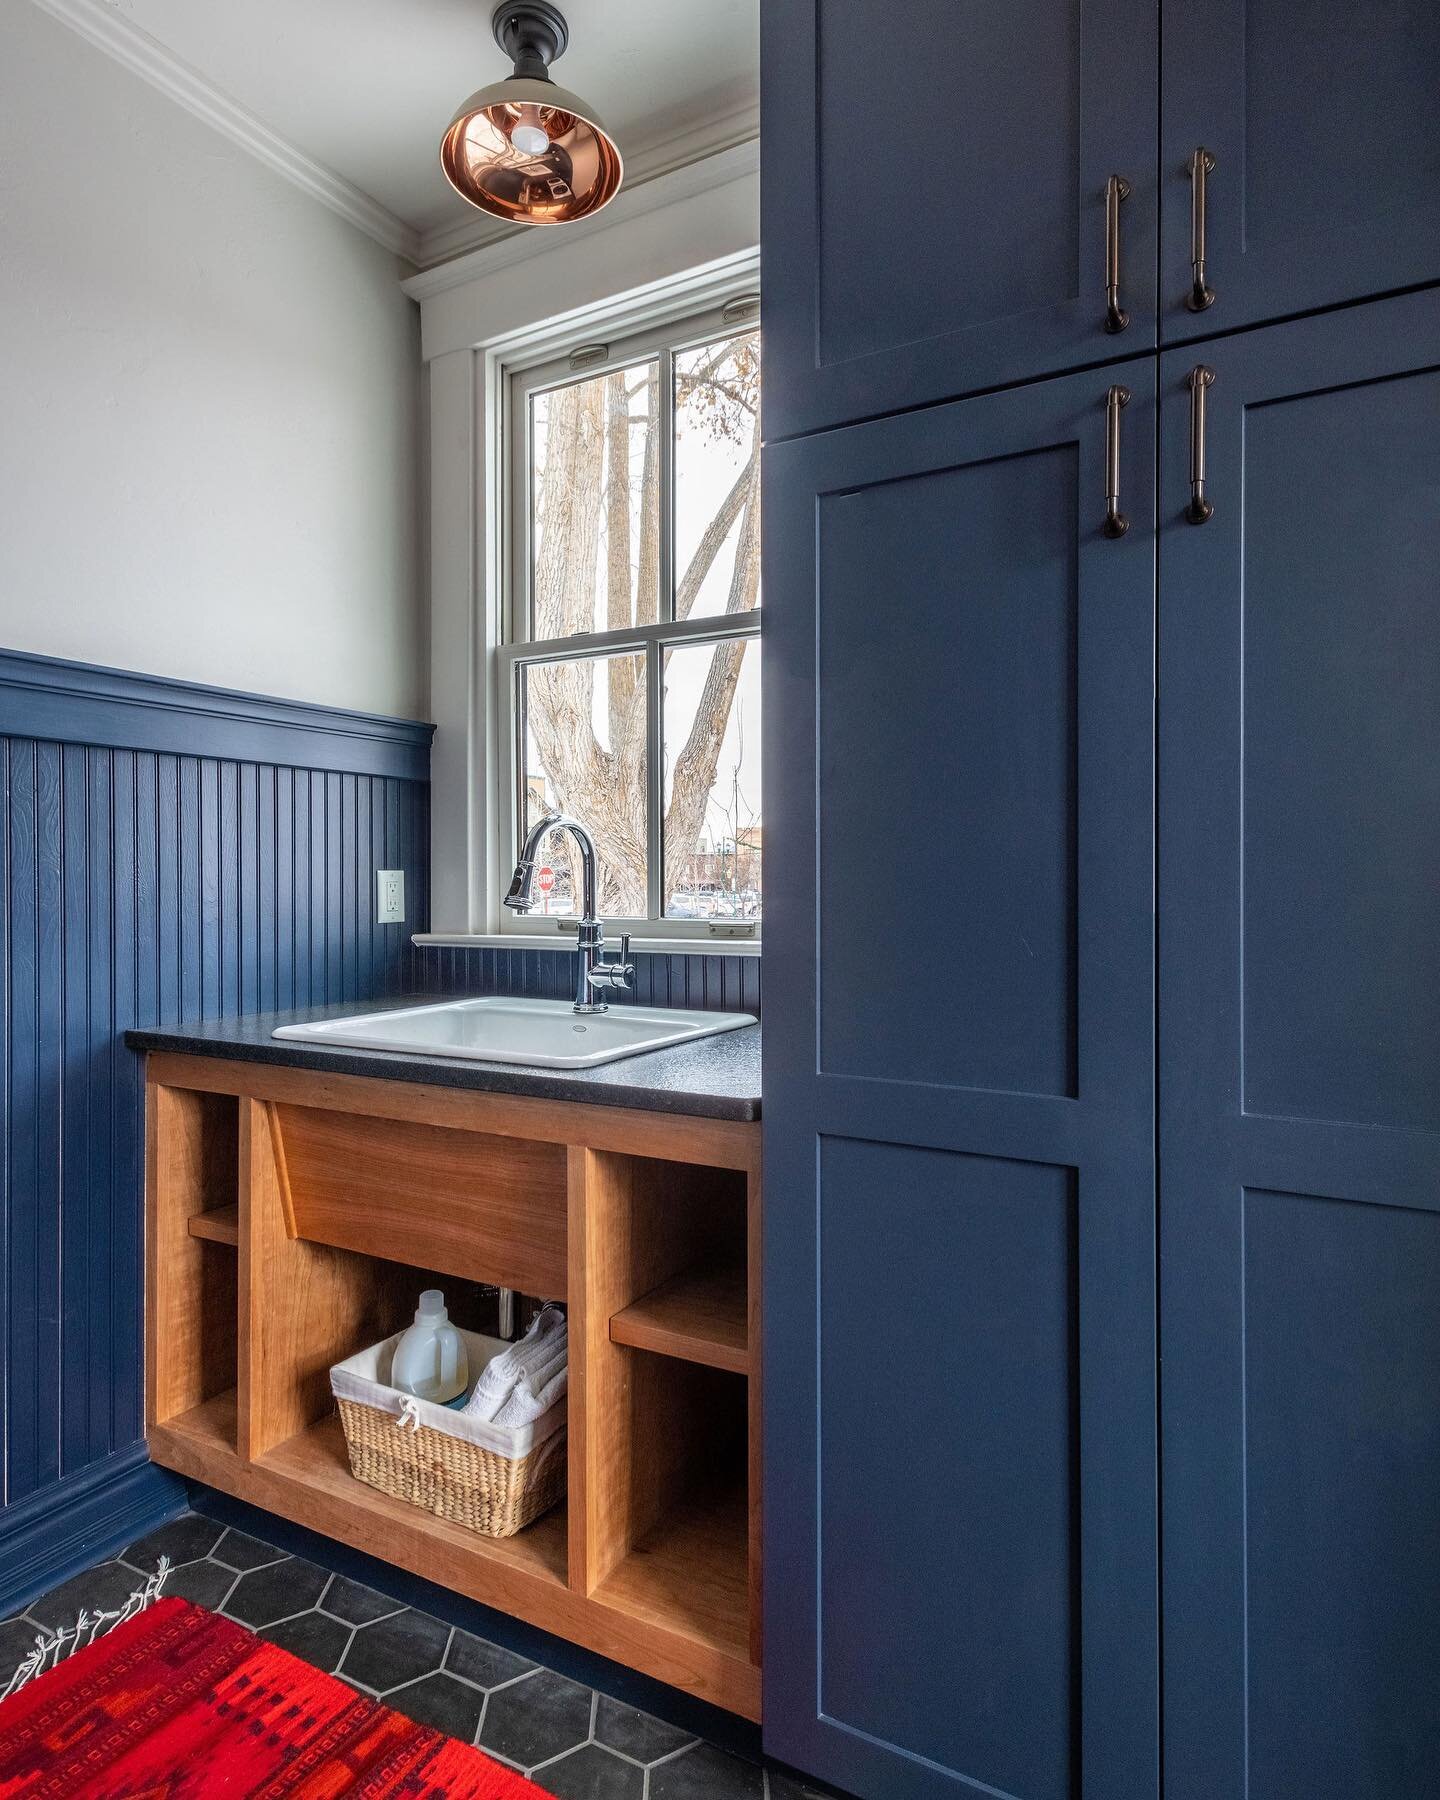 A mudroom that&rsquo;s as pretty as it is functional. 📷 by @jlowryvizzutti 

#interiordesigner #mudroomdesign #bellinghaminteriordesign #bellinghaminteriordesigner #sanjuanislandinteriors #seattleinteriordesign #seattleinteriordesigner #pnwinteriord